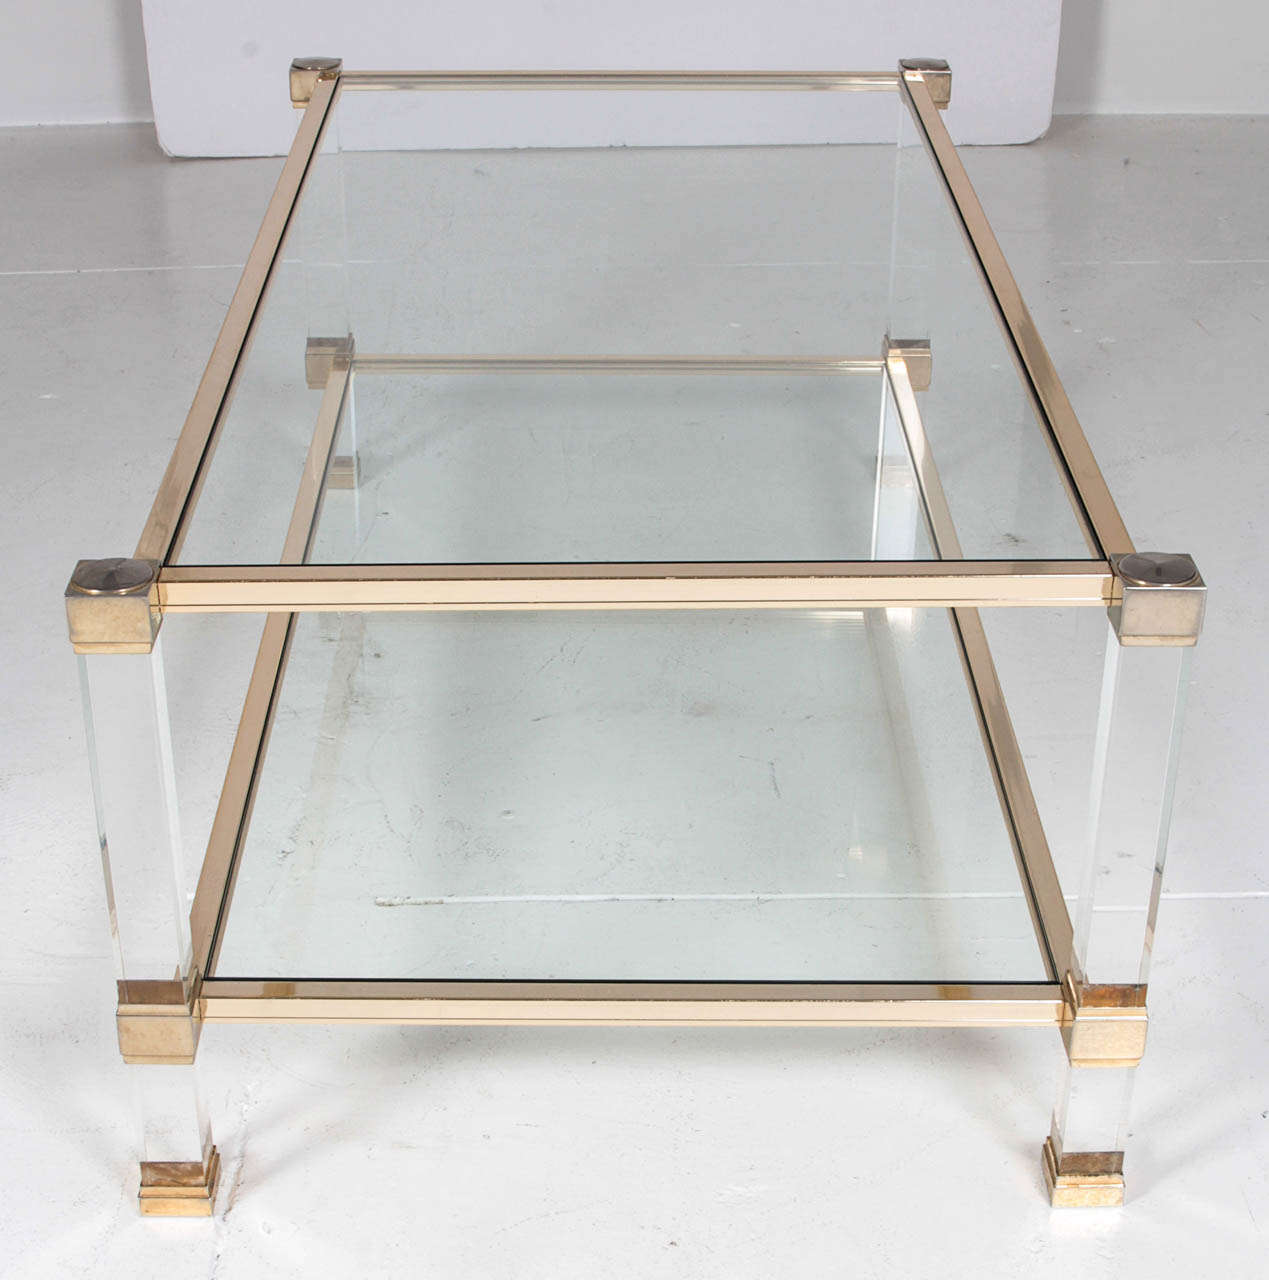 Pierre Vandel Lucite Coffee Table In Excellent Condition For Sale In New Jersey City, NJ